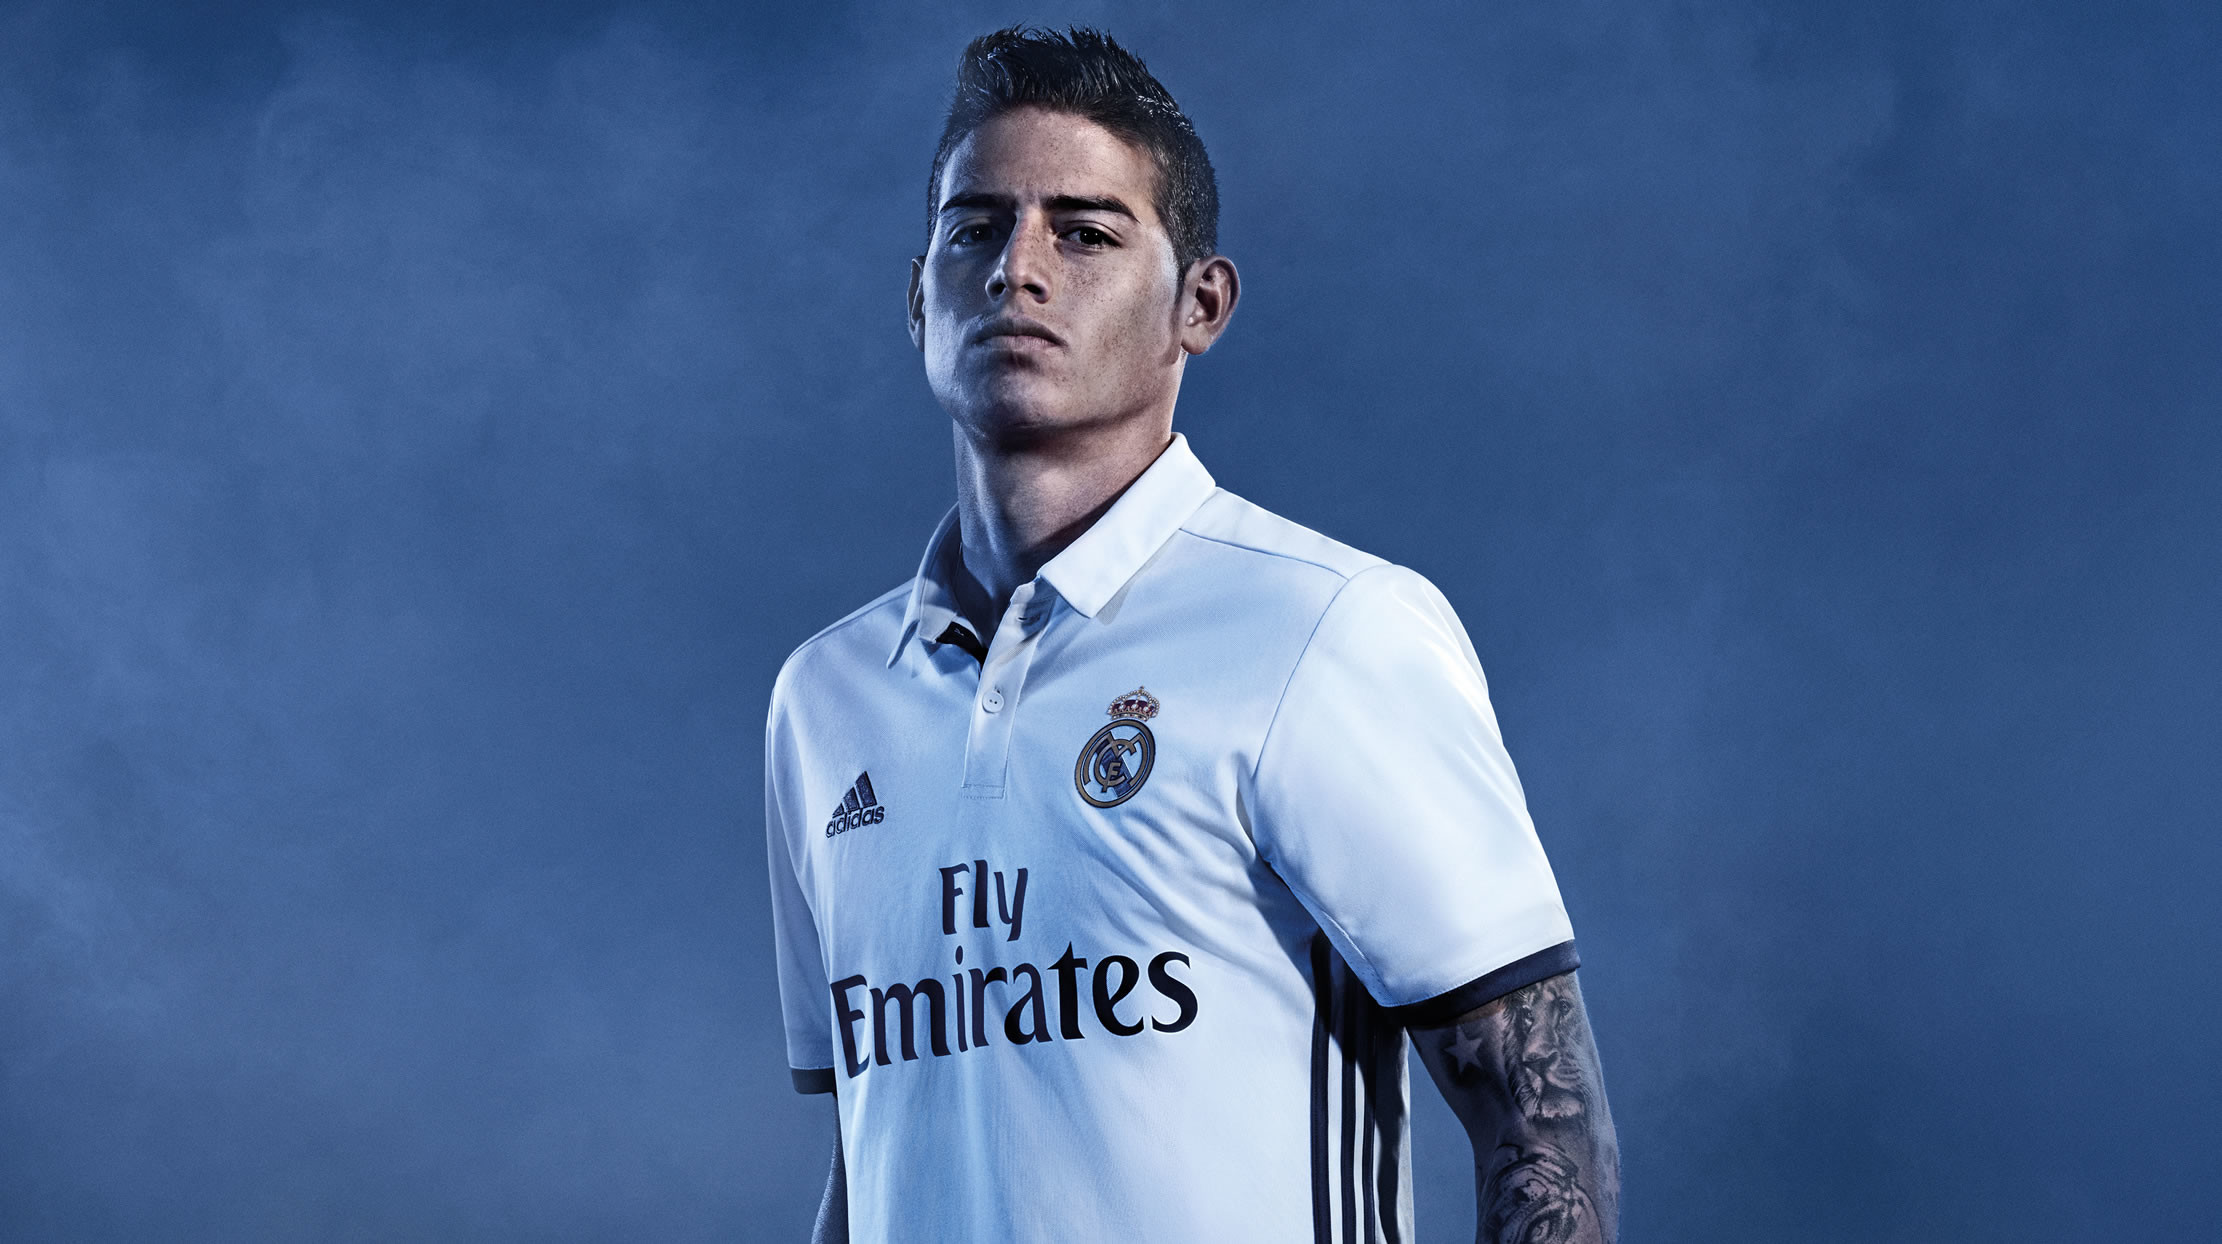 Real Madrid releases new 2016 / 17 home and away kit